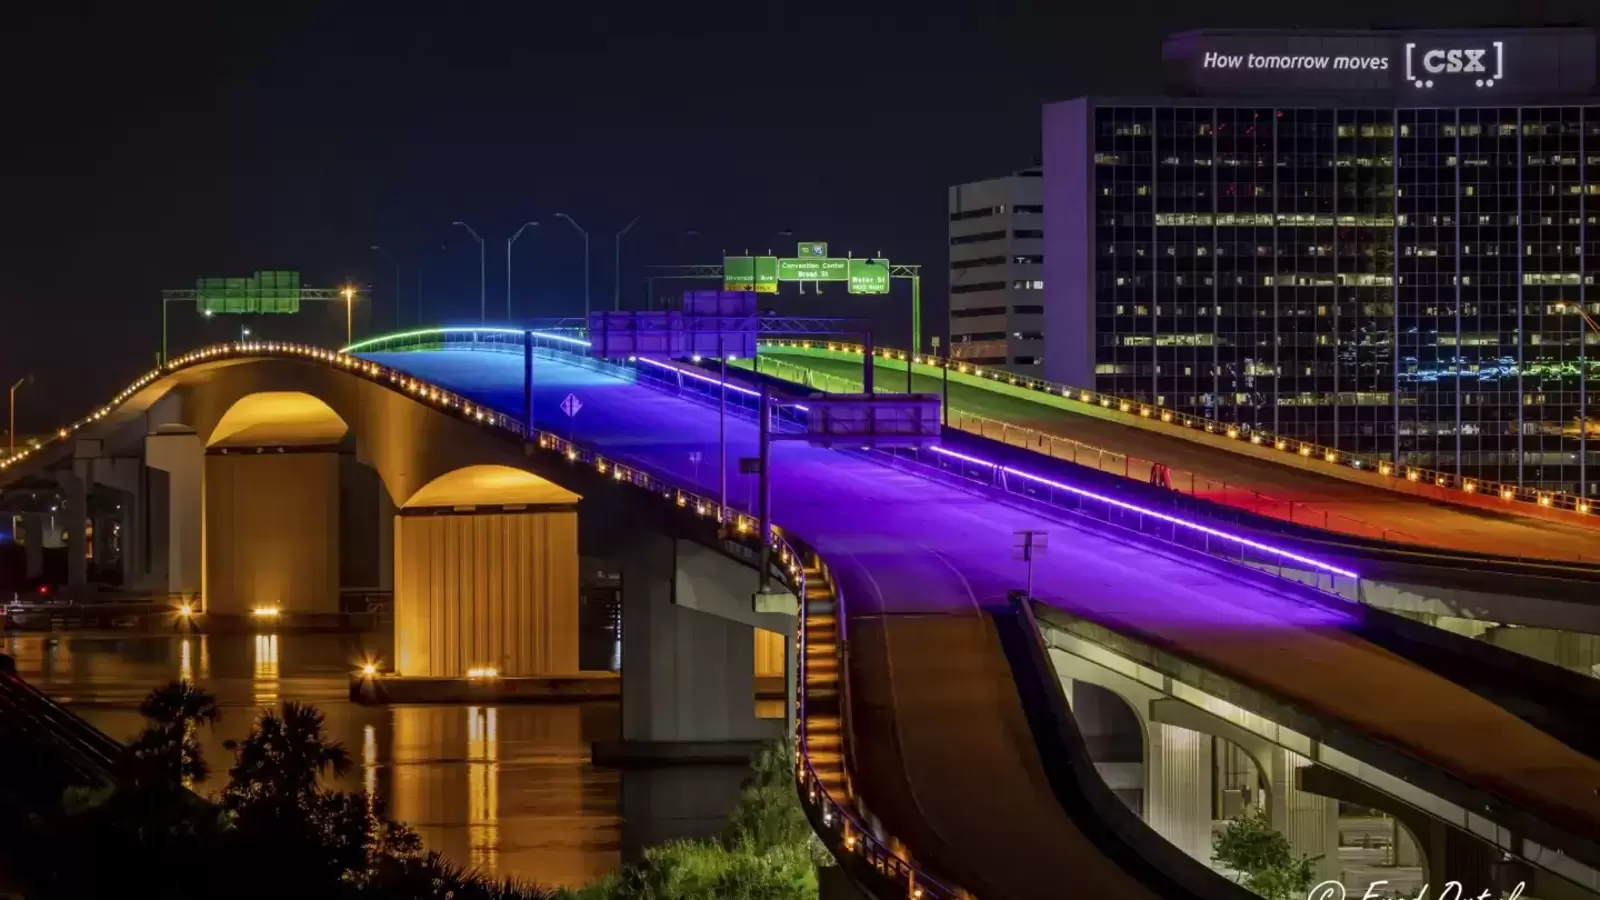 Floridians take a stand: Main Street Bridge Painted in Pride Colours against Florida's Transportation Department orders